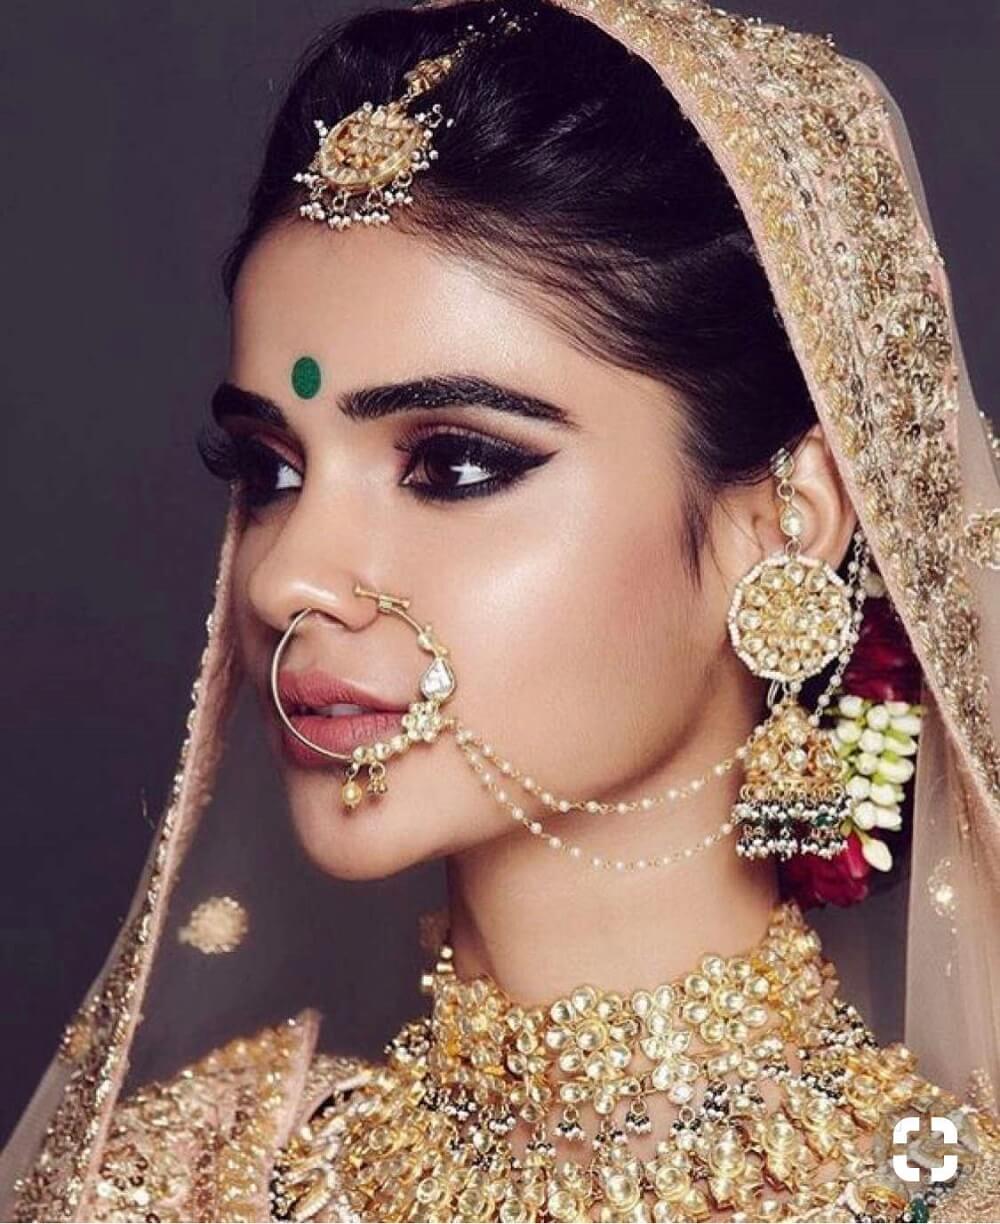 Traditional Indian Bride Nude - 19 Dazzling Real Brides That Slayed in the Nude Makeup Look